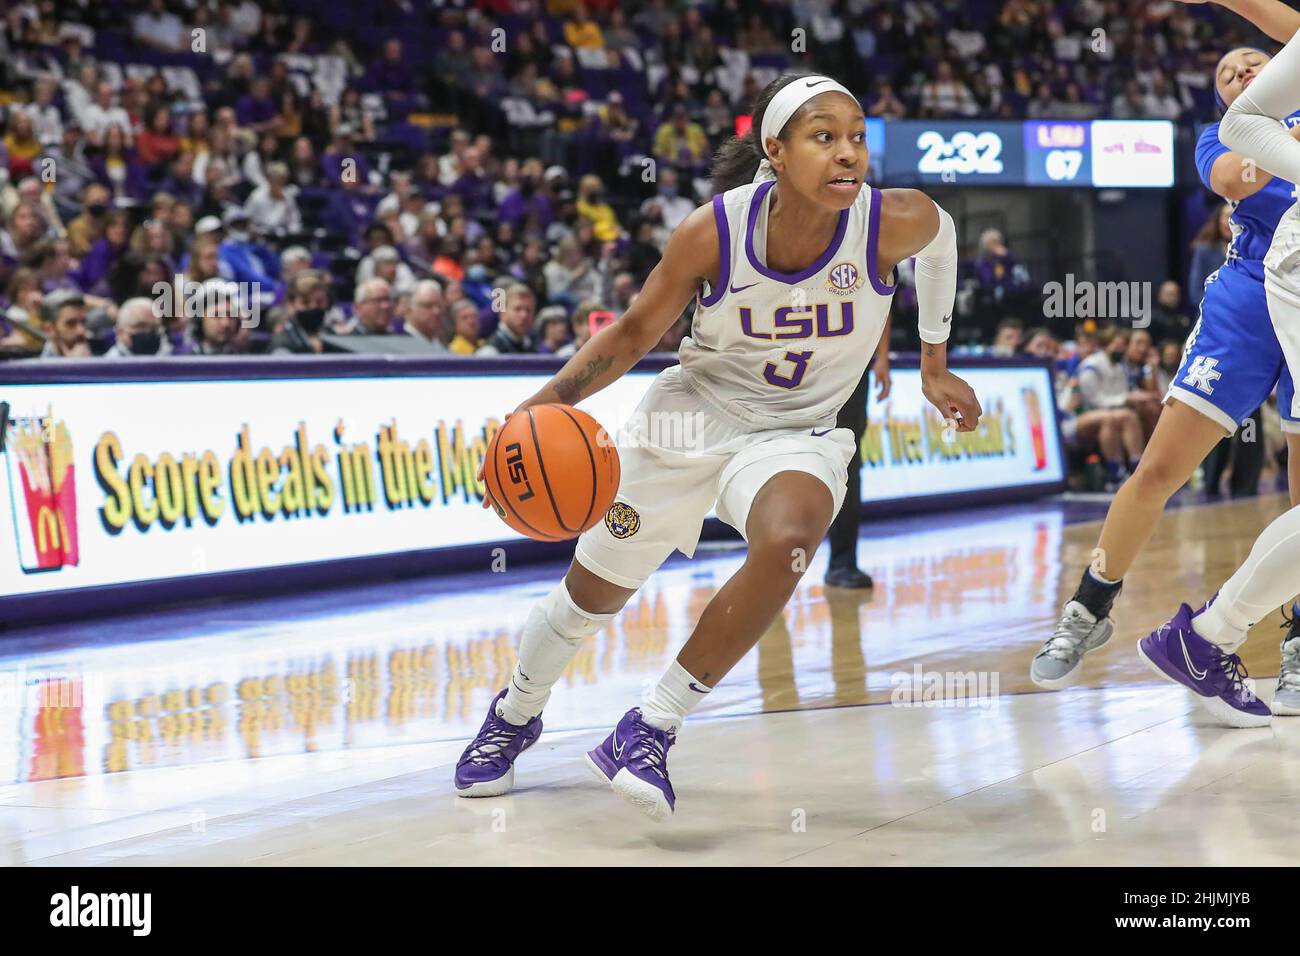 Baton Rouge, LA, USA. 30th Jan, 2022. LSU's Khayla Pointer (3) drives to  the basket during NCAA Women's Basketball action between the Kentucky  Wildcats and the LSU Tigers at the Pete Maravich